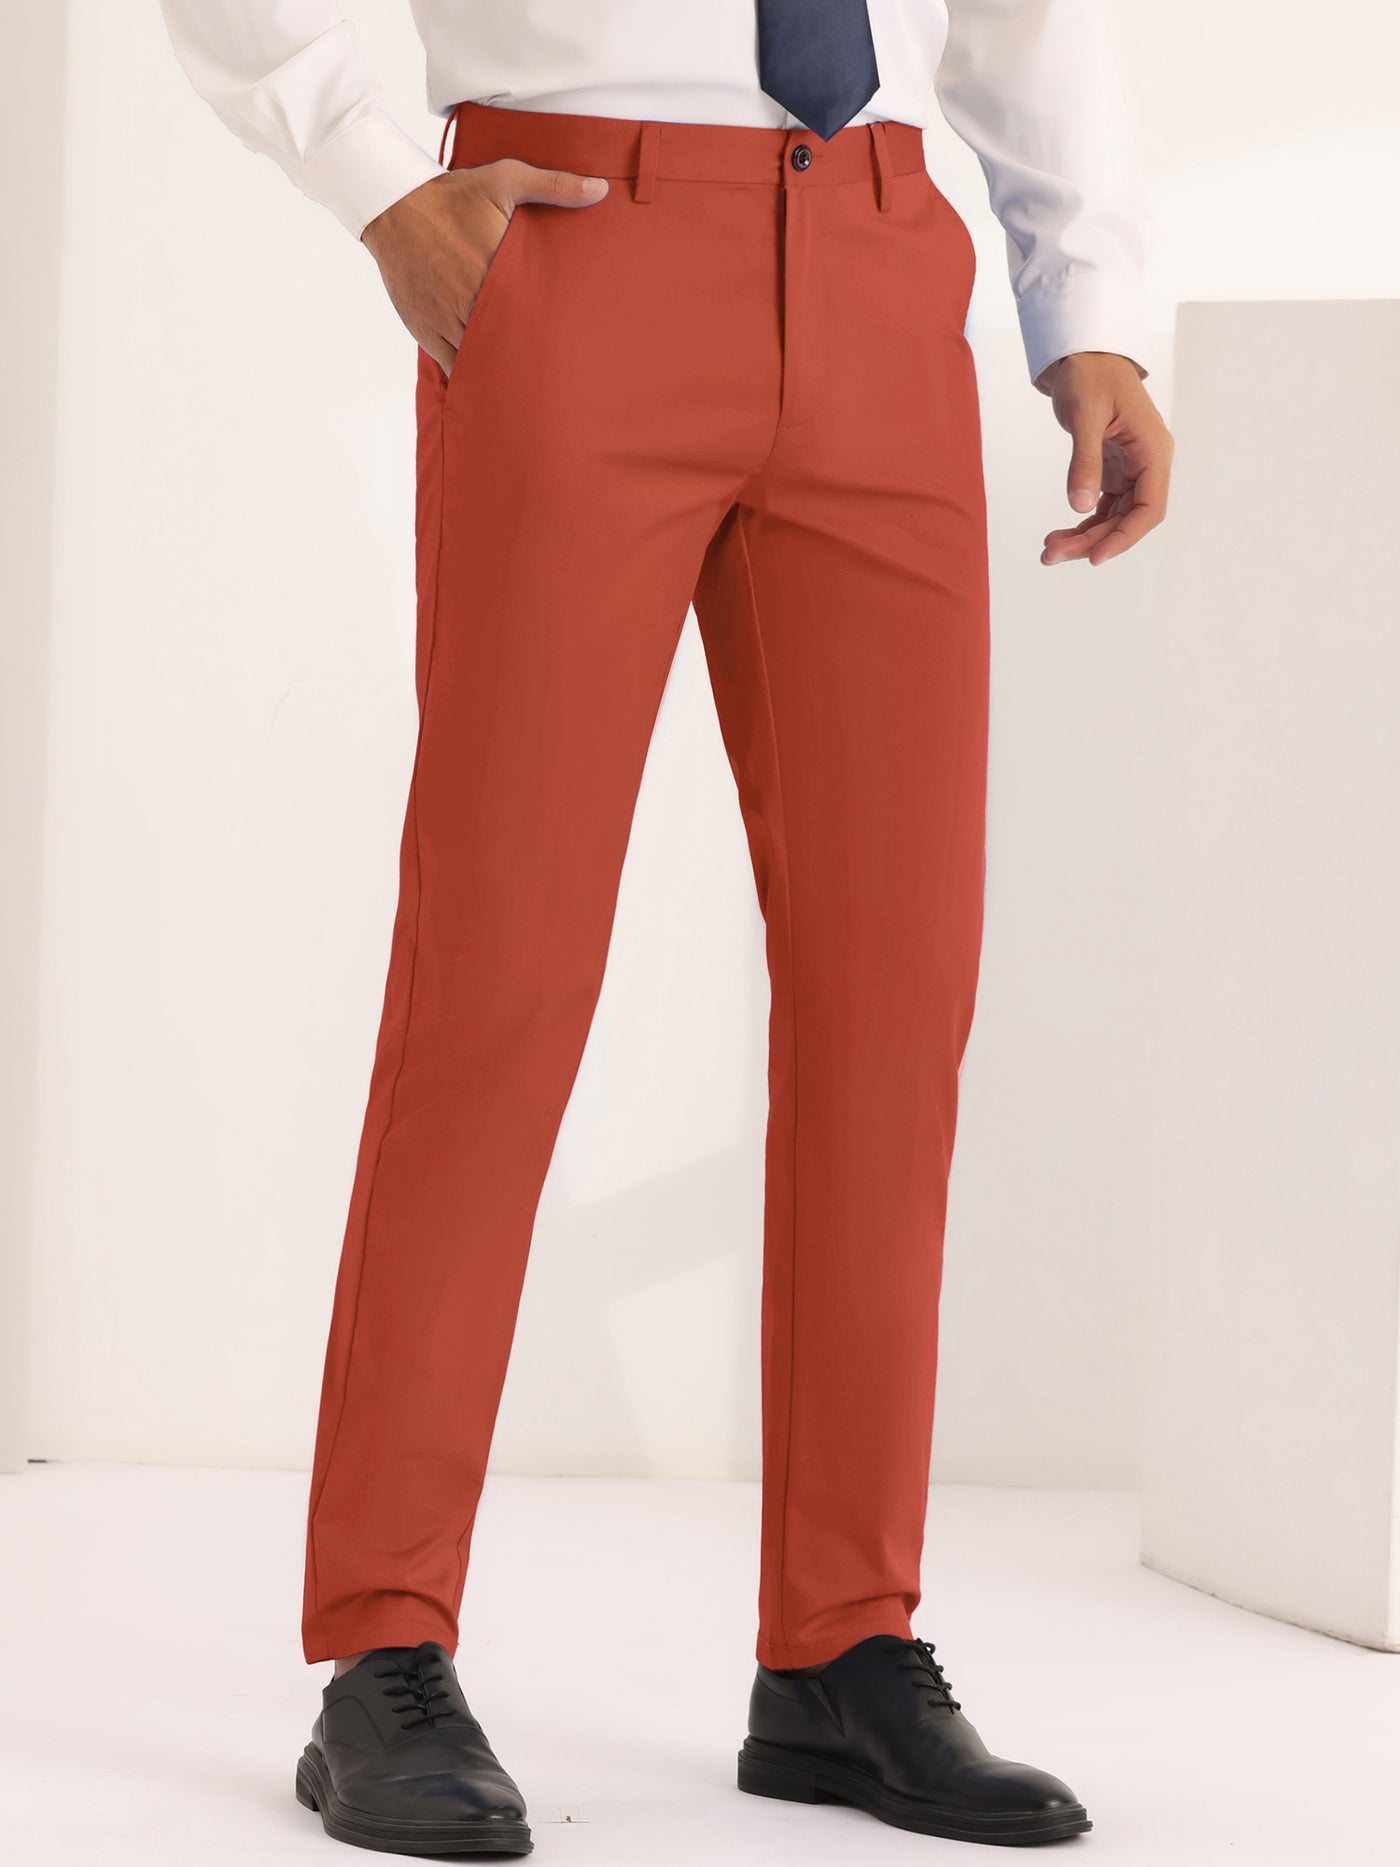 Bublédon Dress Pants for Men's Solid Slim Fit Stretch Flat Front Work Chino Trousers